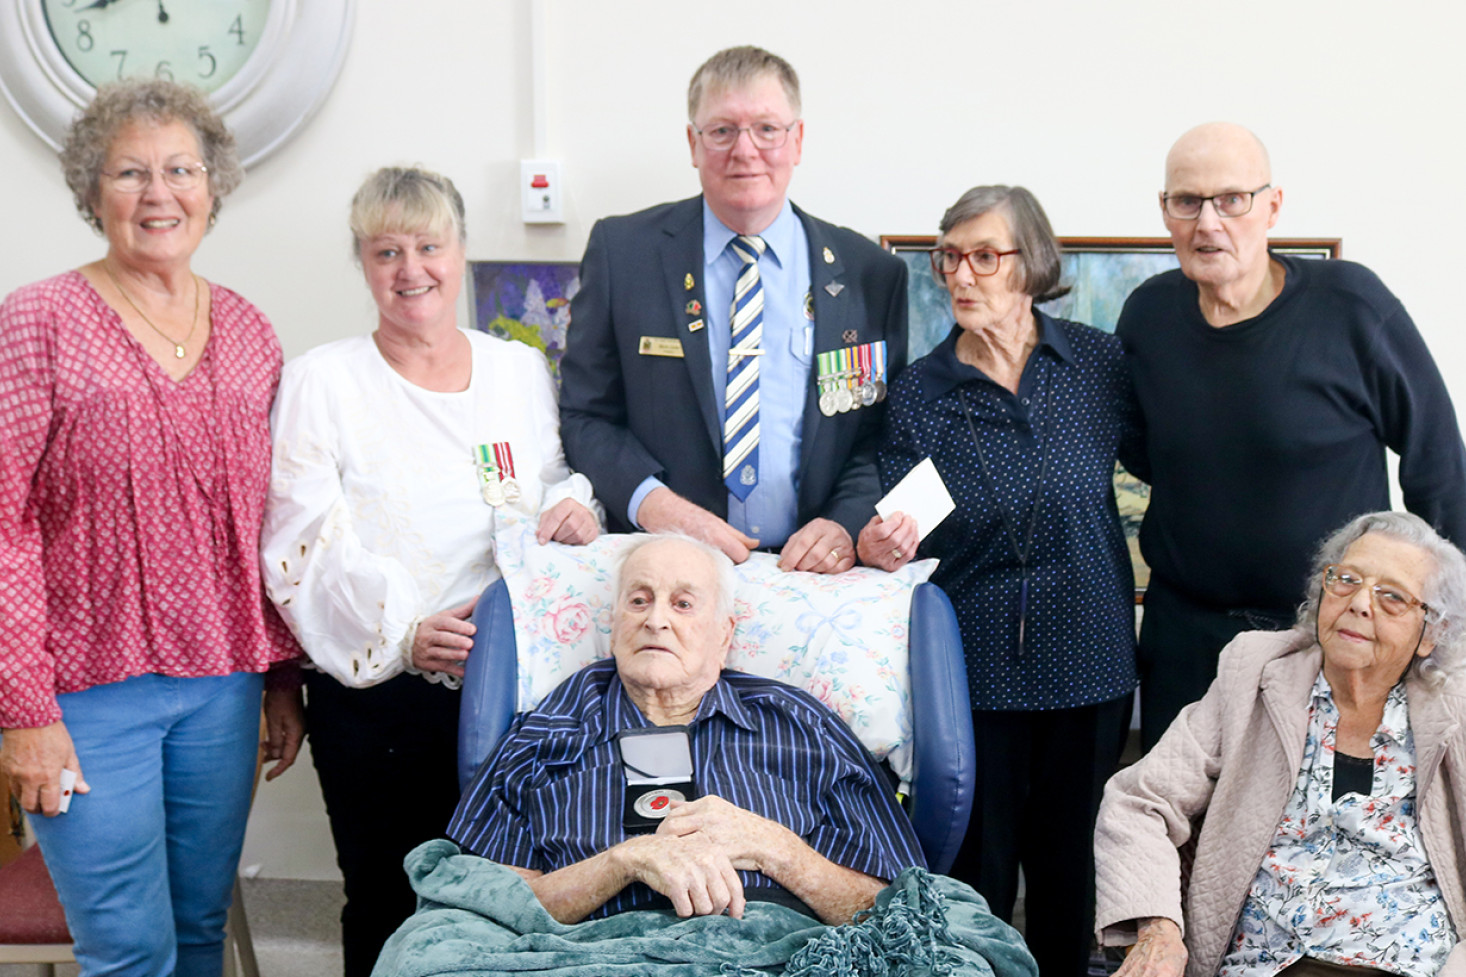 ABOVE: Back L-R Lesley Bryce (niece), Madelyn Martin (visitor), Mark Carter (Oakey RSL President), Joyce Beckwith (sister), Bill Beckwith (brother-in-law). Front L-R Stanley Kellett, Helen Kellett (wife).